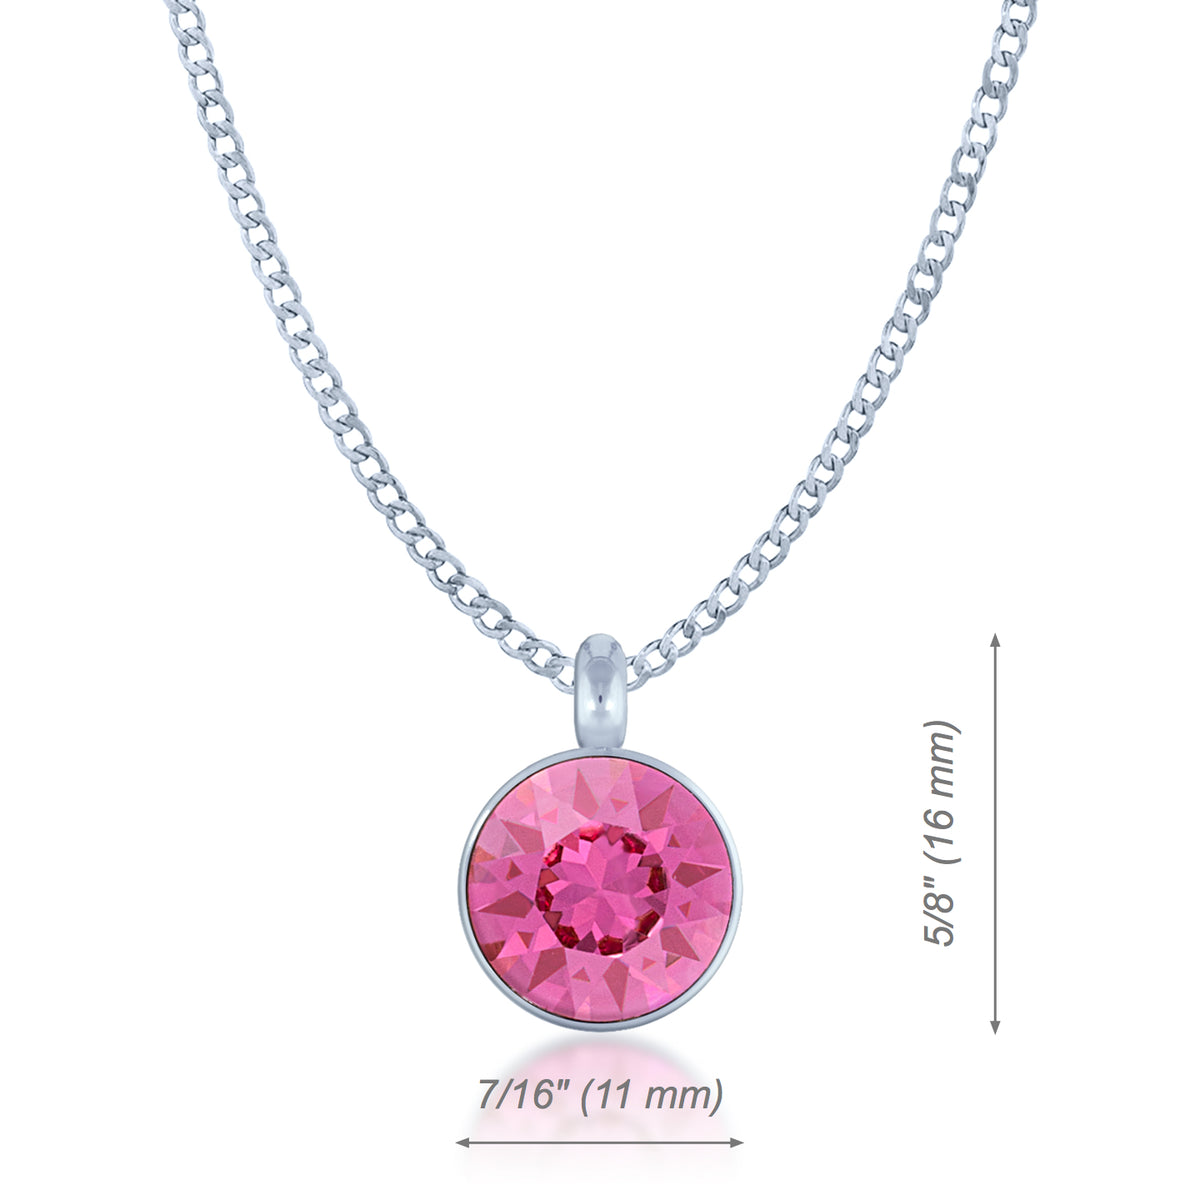 Bella Pendant Necklace with Pink Rose Round Crystals from Swarovski Silver Toned Rhodium Plated - Ed Heart